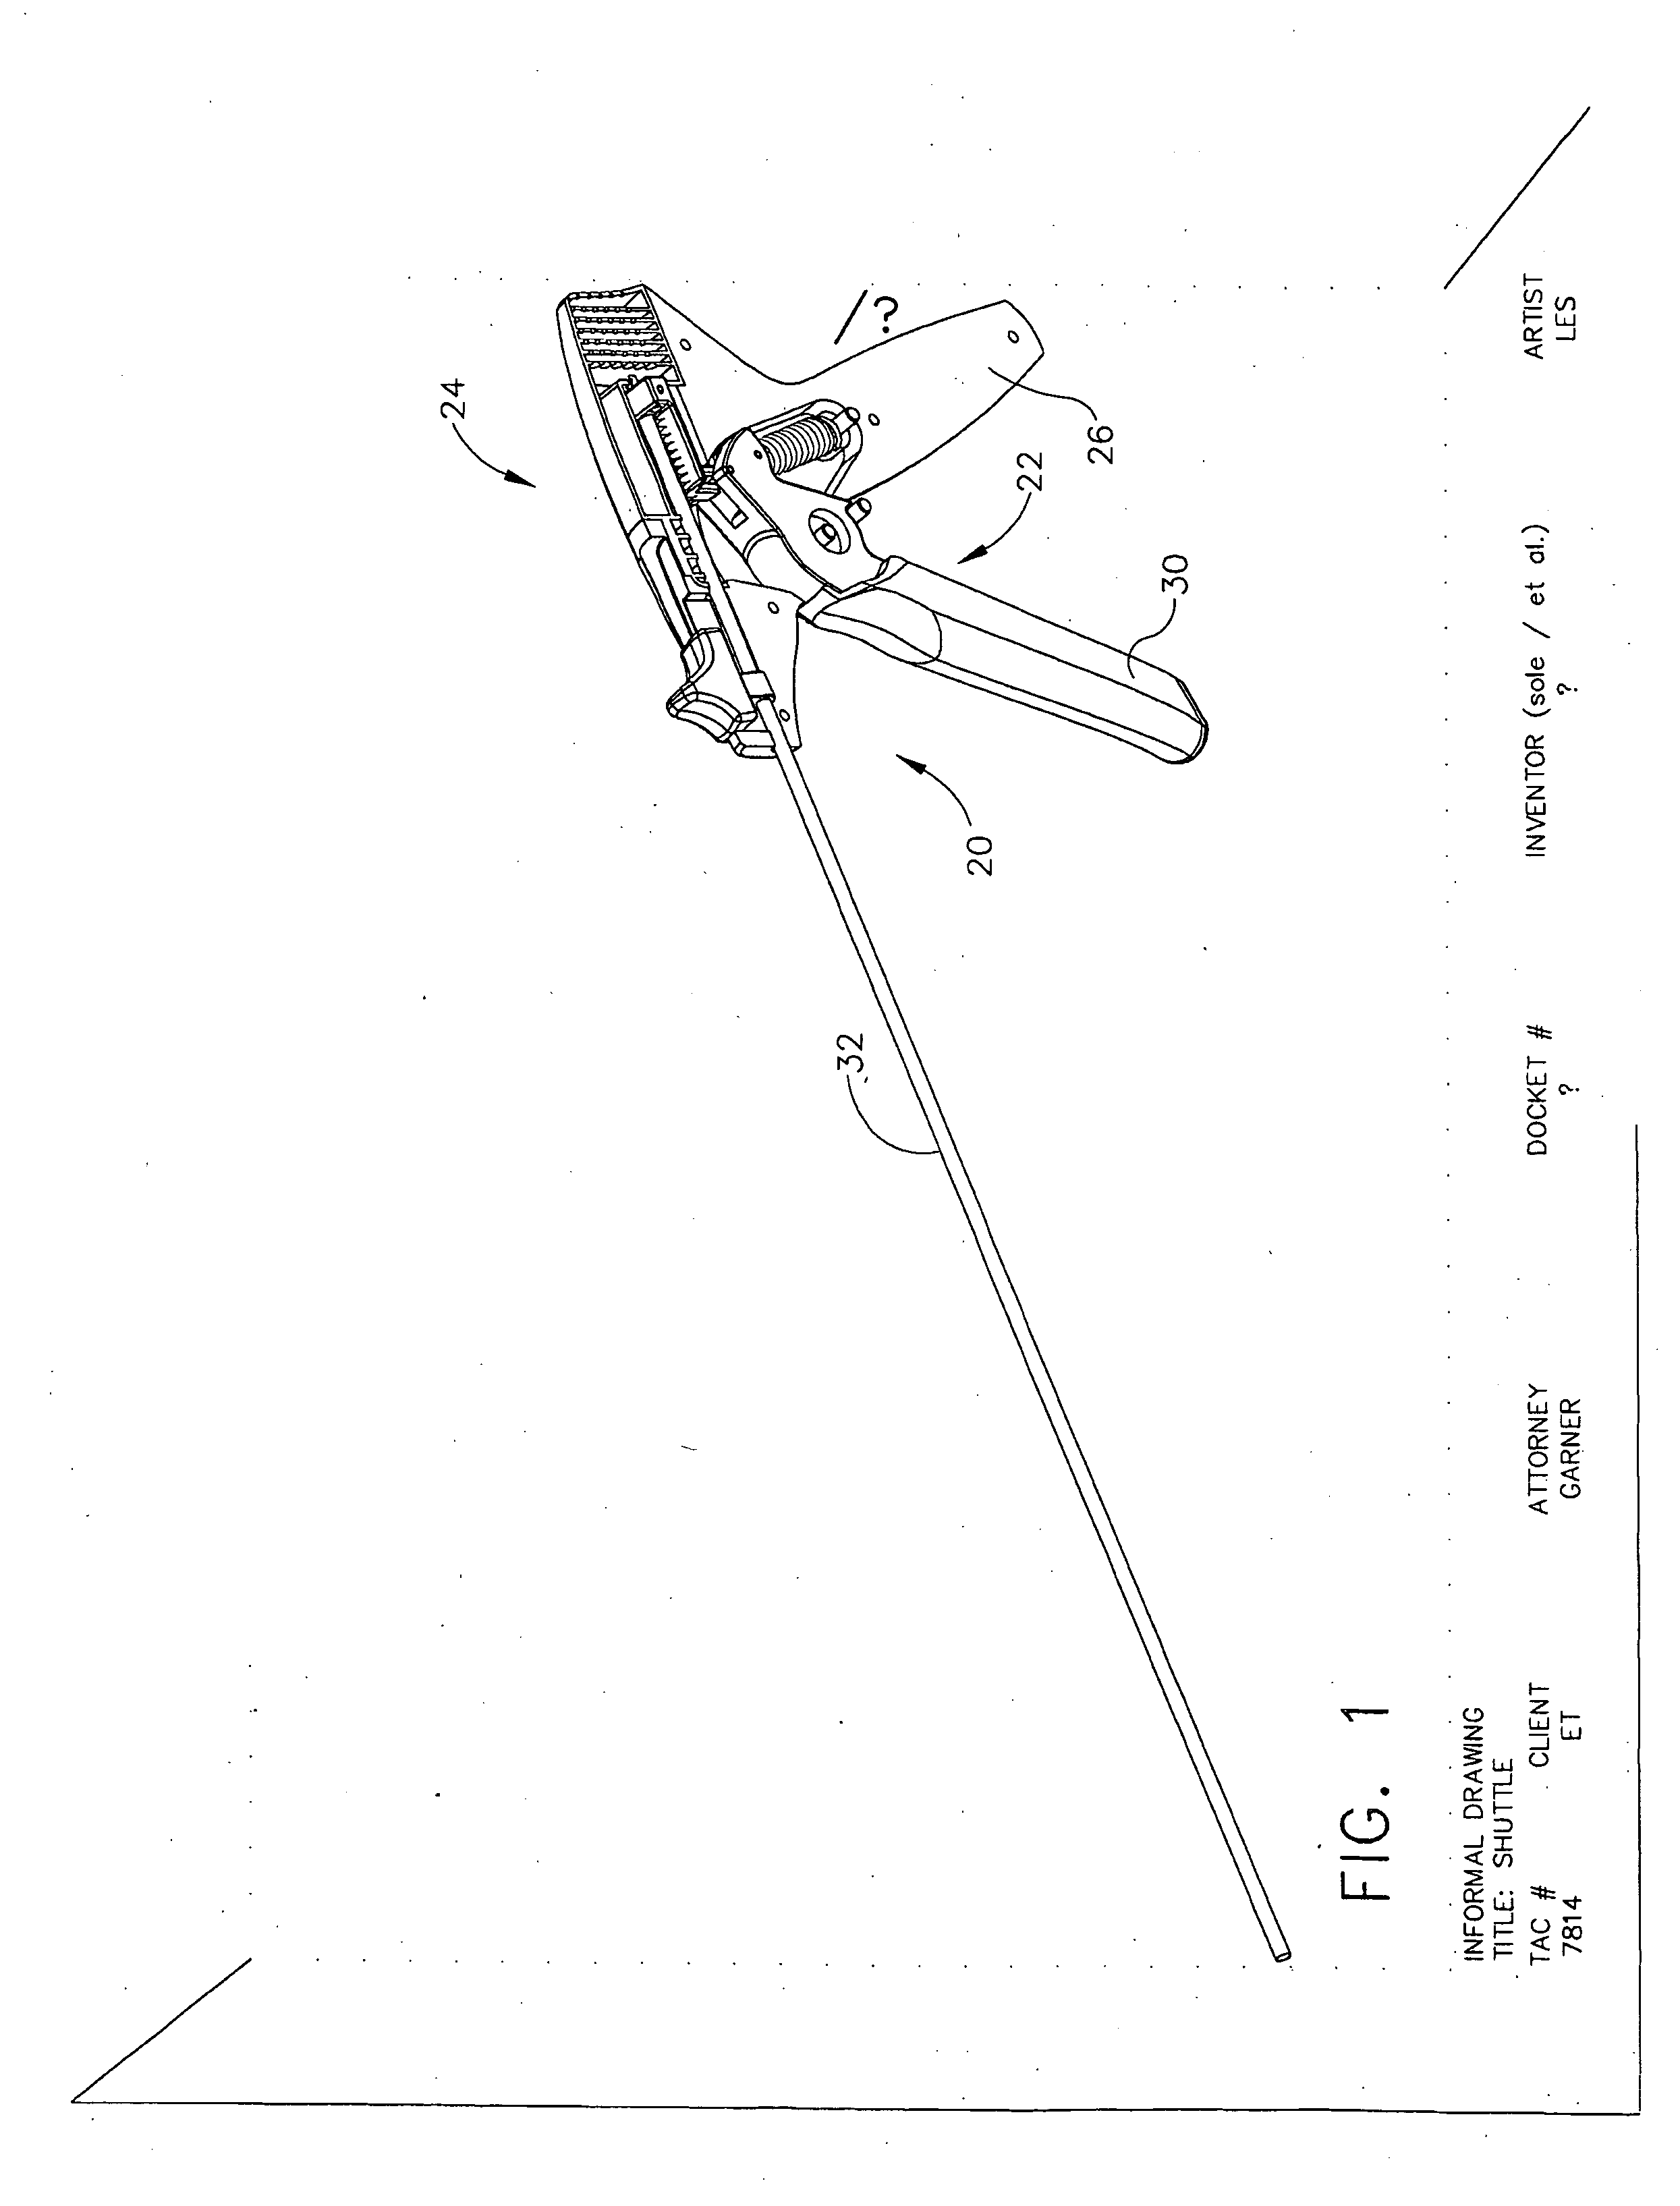 Reloadable laparoscopic fastener deploying device with disposable cartridge for use in a gastric volume reduction procedure